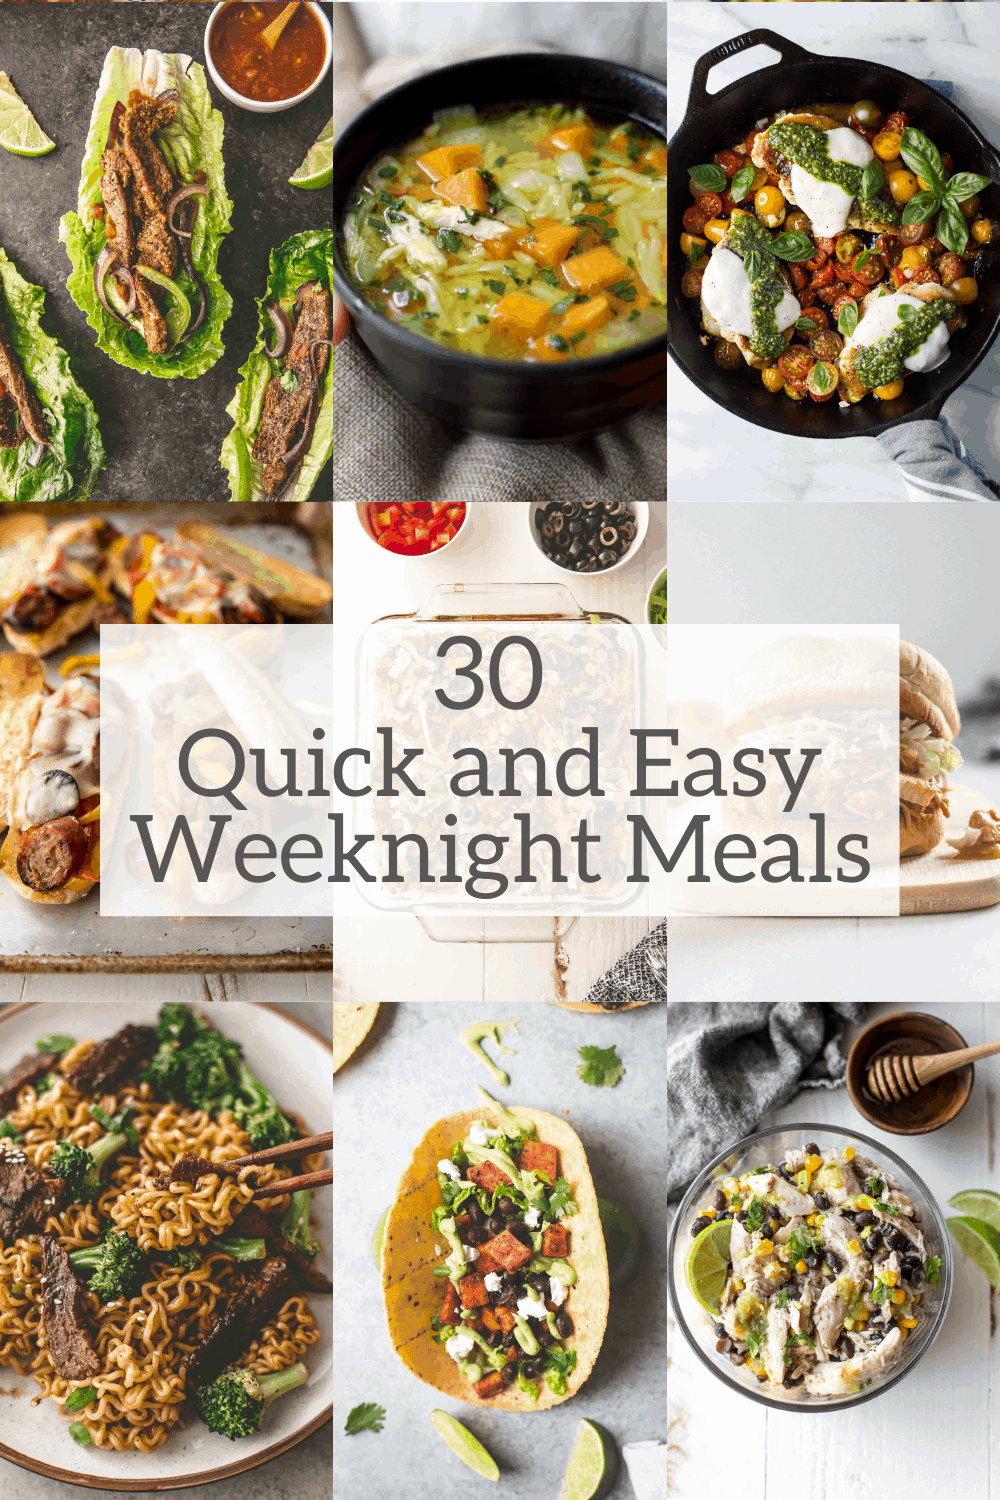 30 Quick and Easy Weeknight Meals